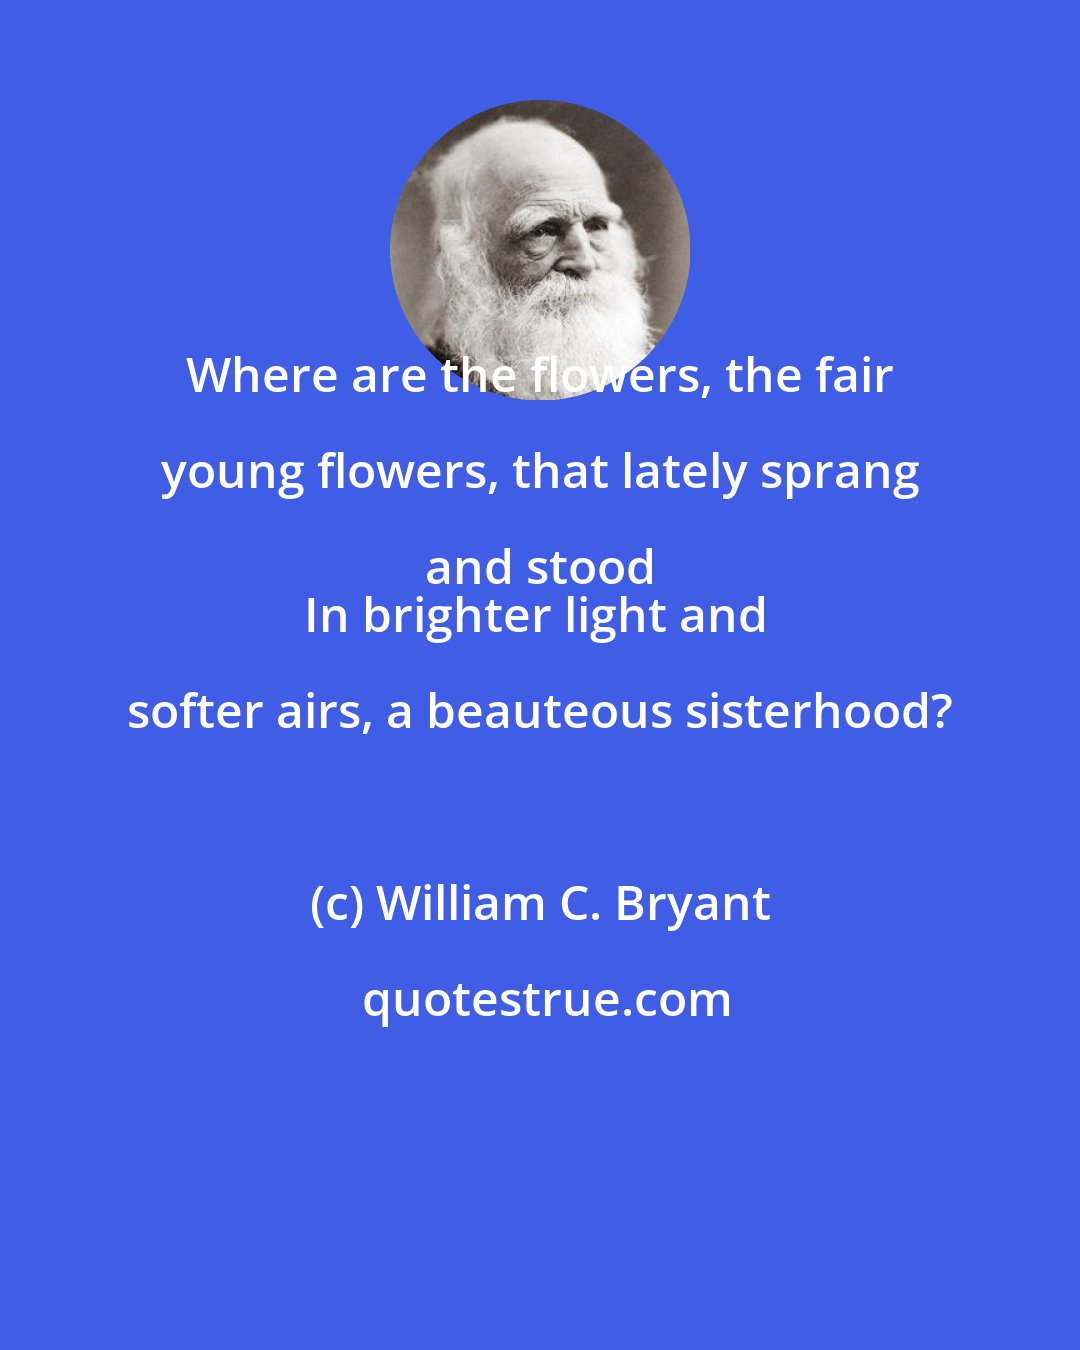 William C. Bryant: Where are the flowers, the fair young flowers, that lately sprang and stood 
In brighter light and softer airs, a beauteous sisterhood?